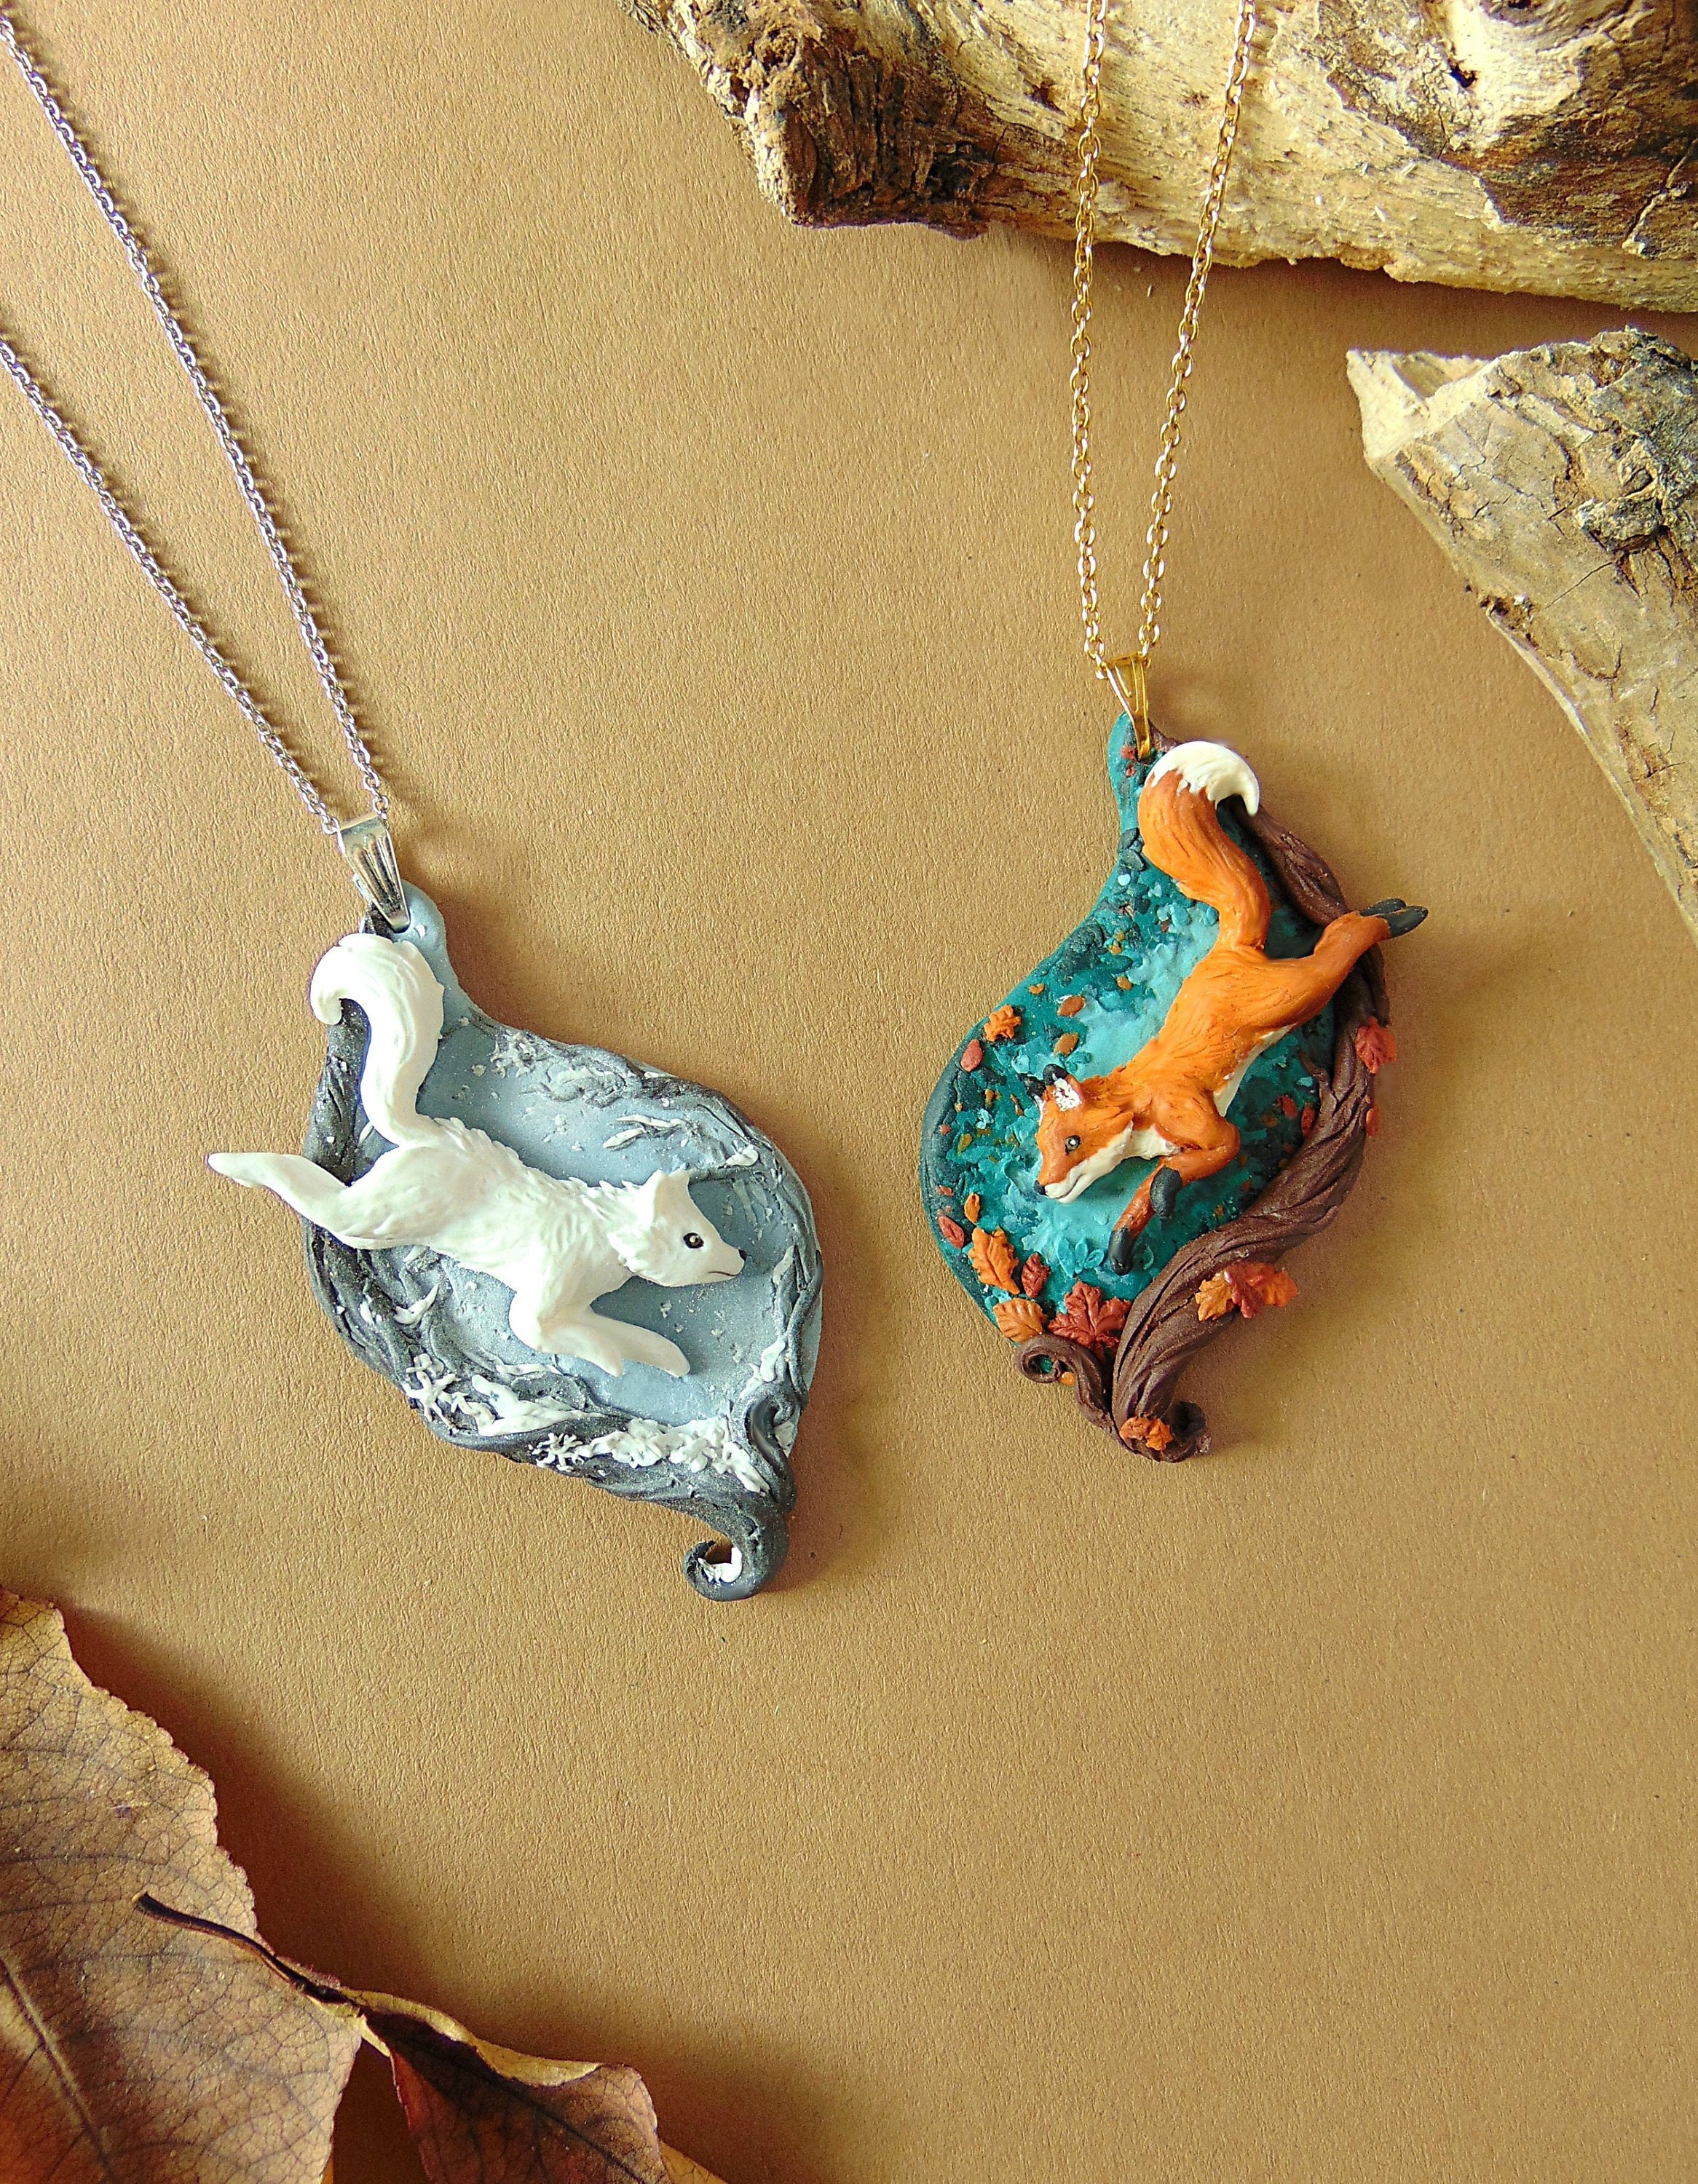 16 Clay Polymer Jewelry Projects to Make This Weekend - Ideal Me